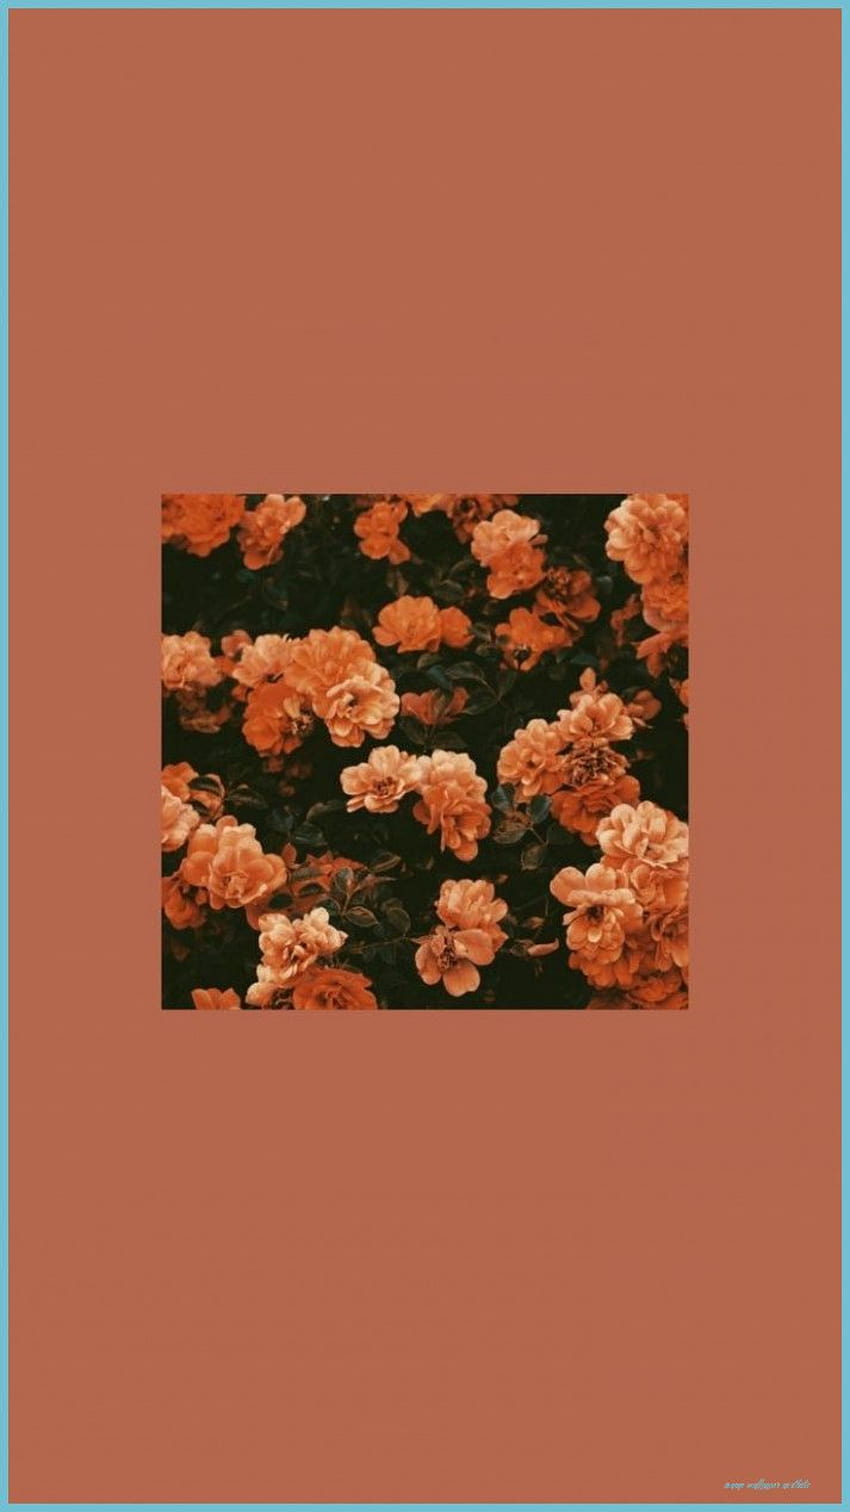 An orange aesthetic wallpaper with a picture of flowers. - Orange